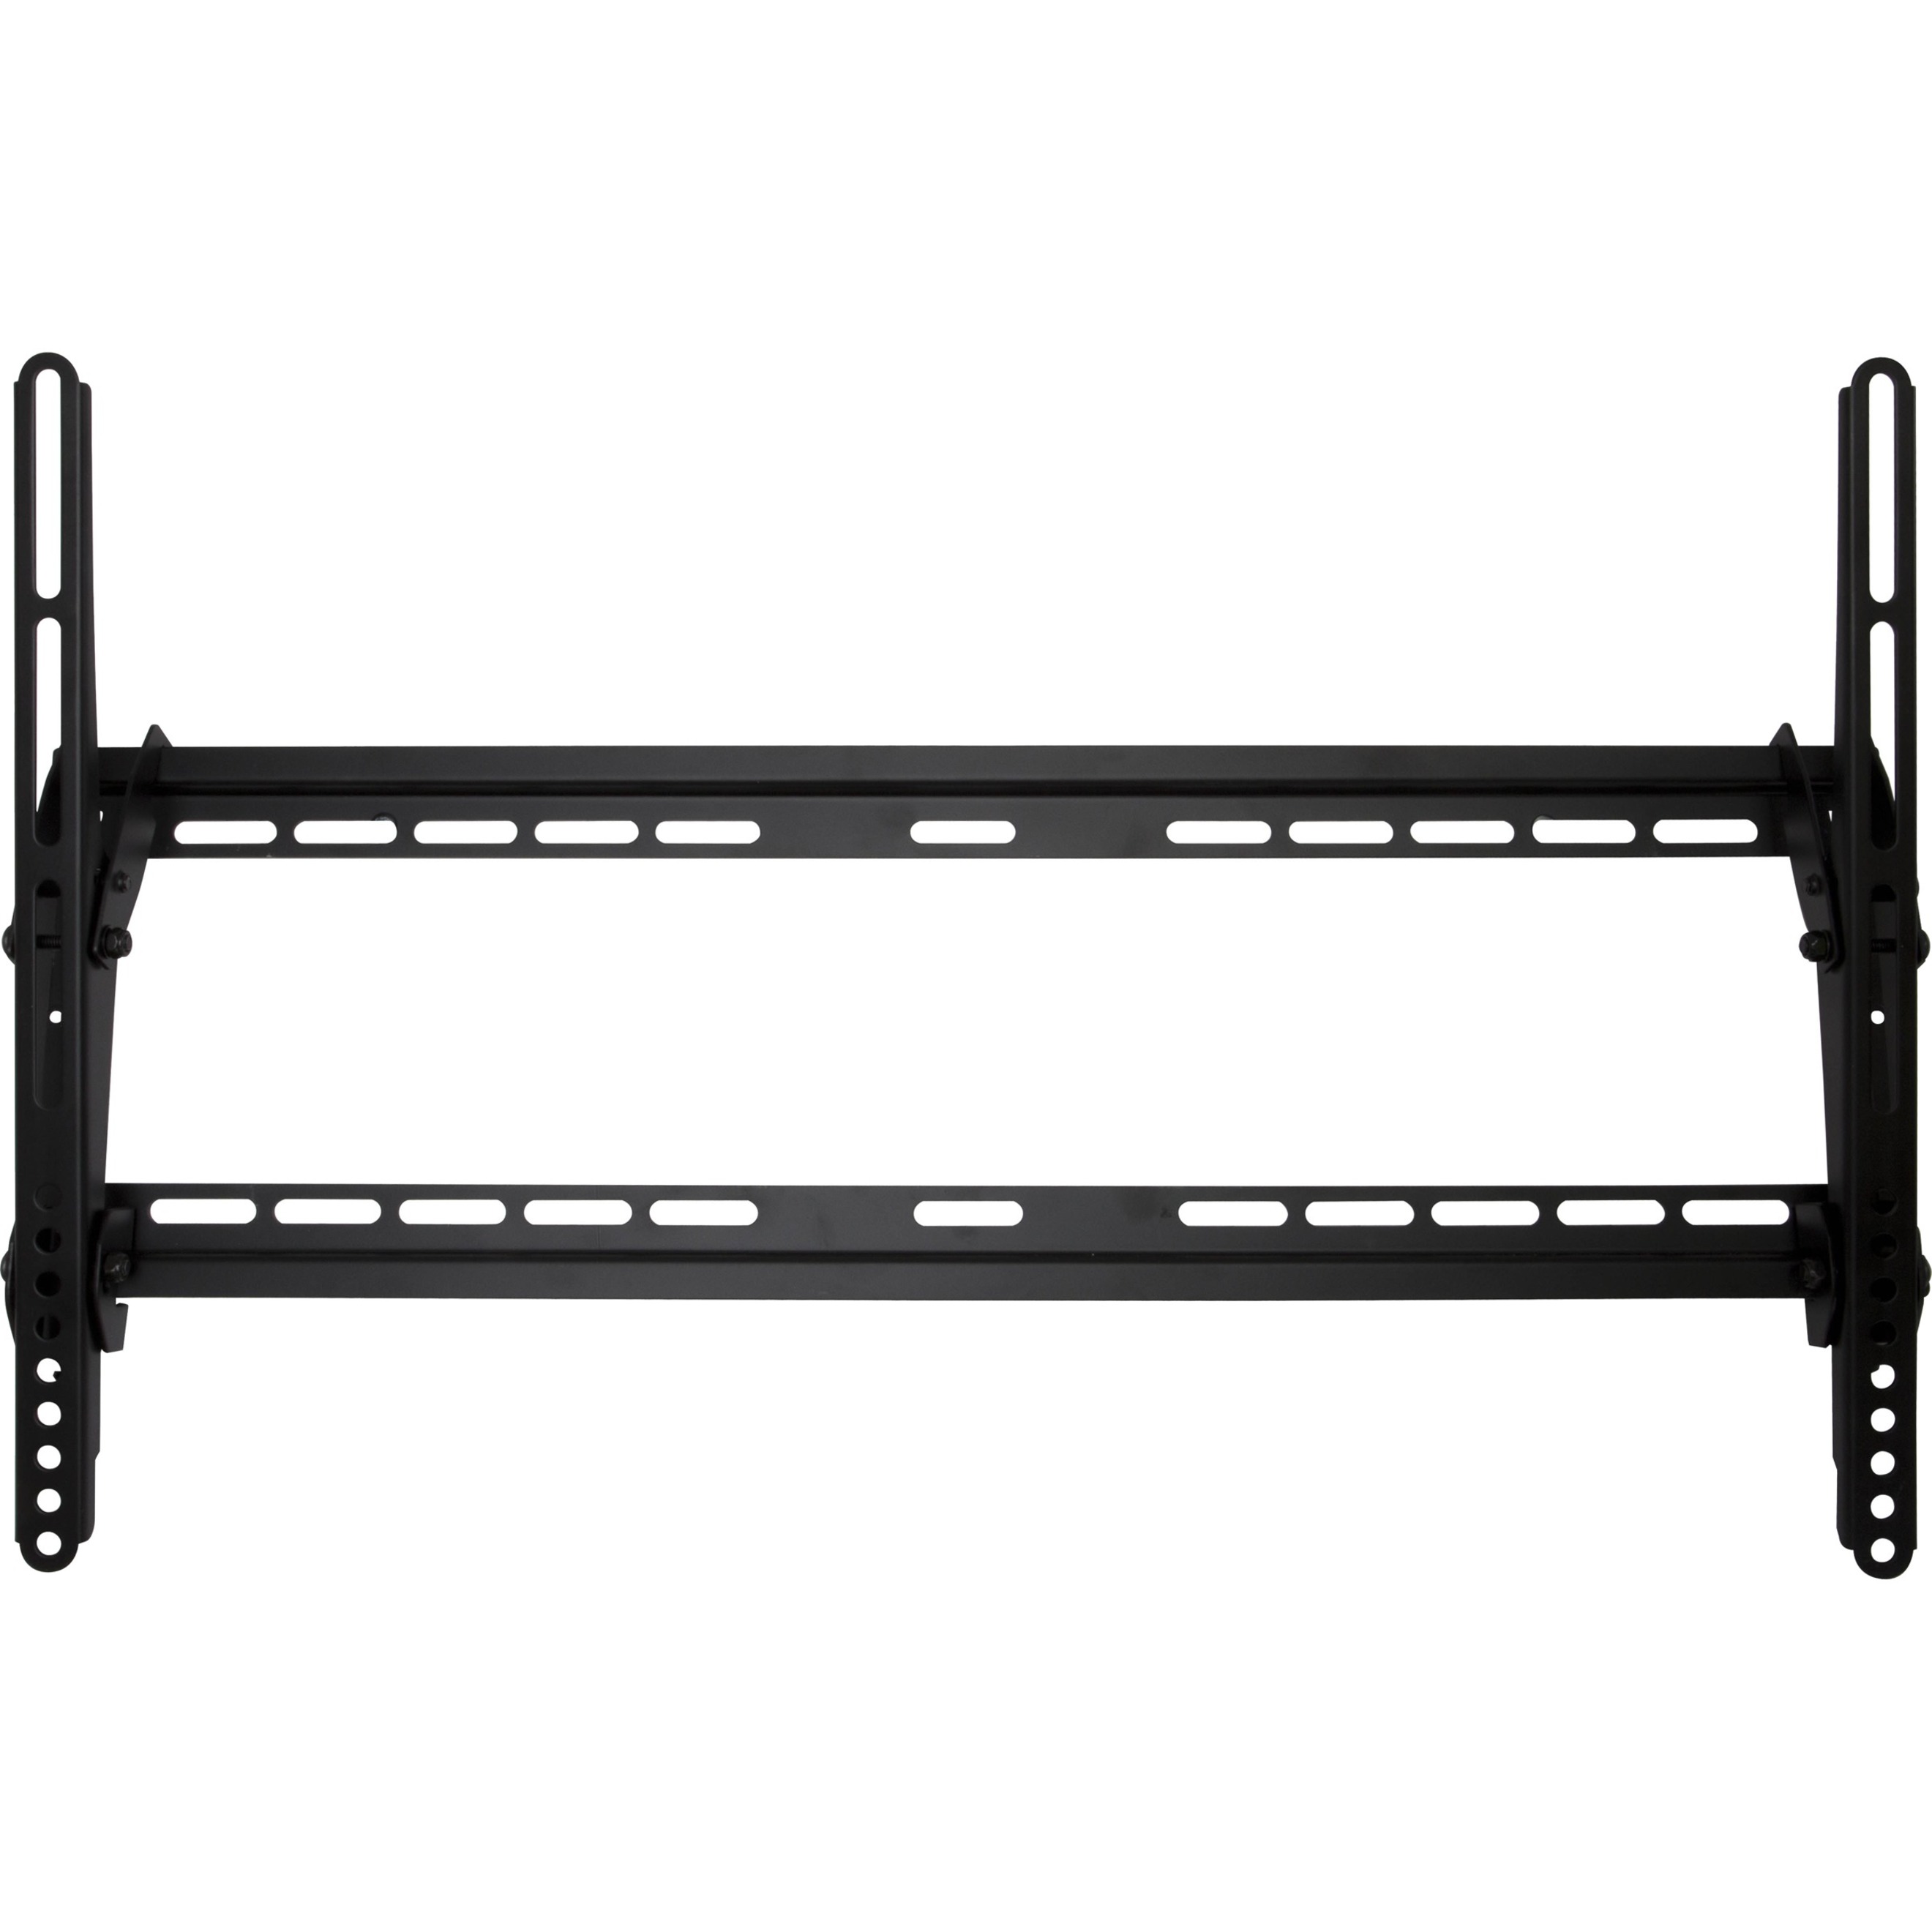 A601T-T Tilting TV Wall Mount for TVs from 37" to 80" - image 3 of 3